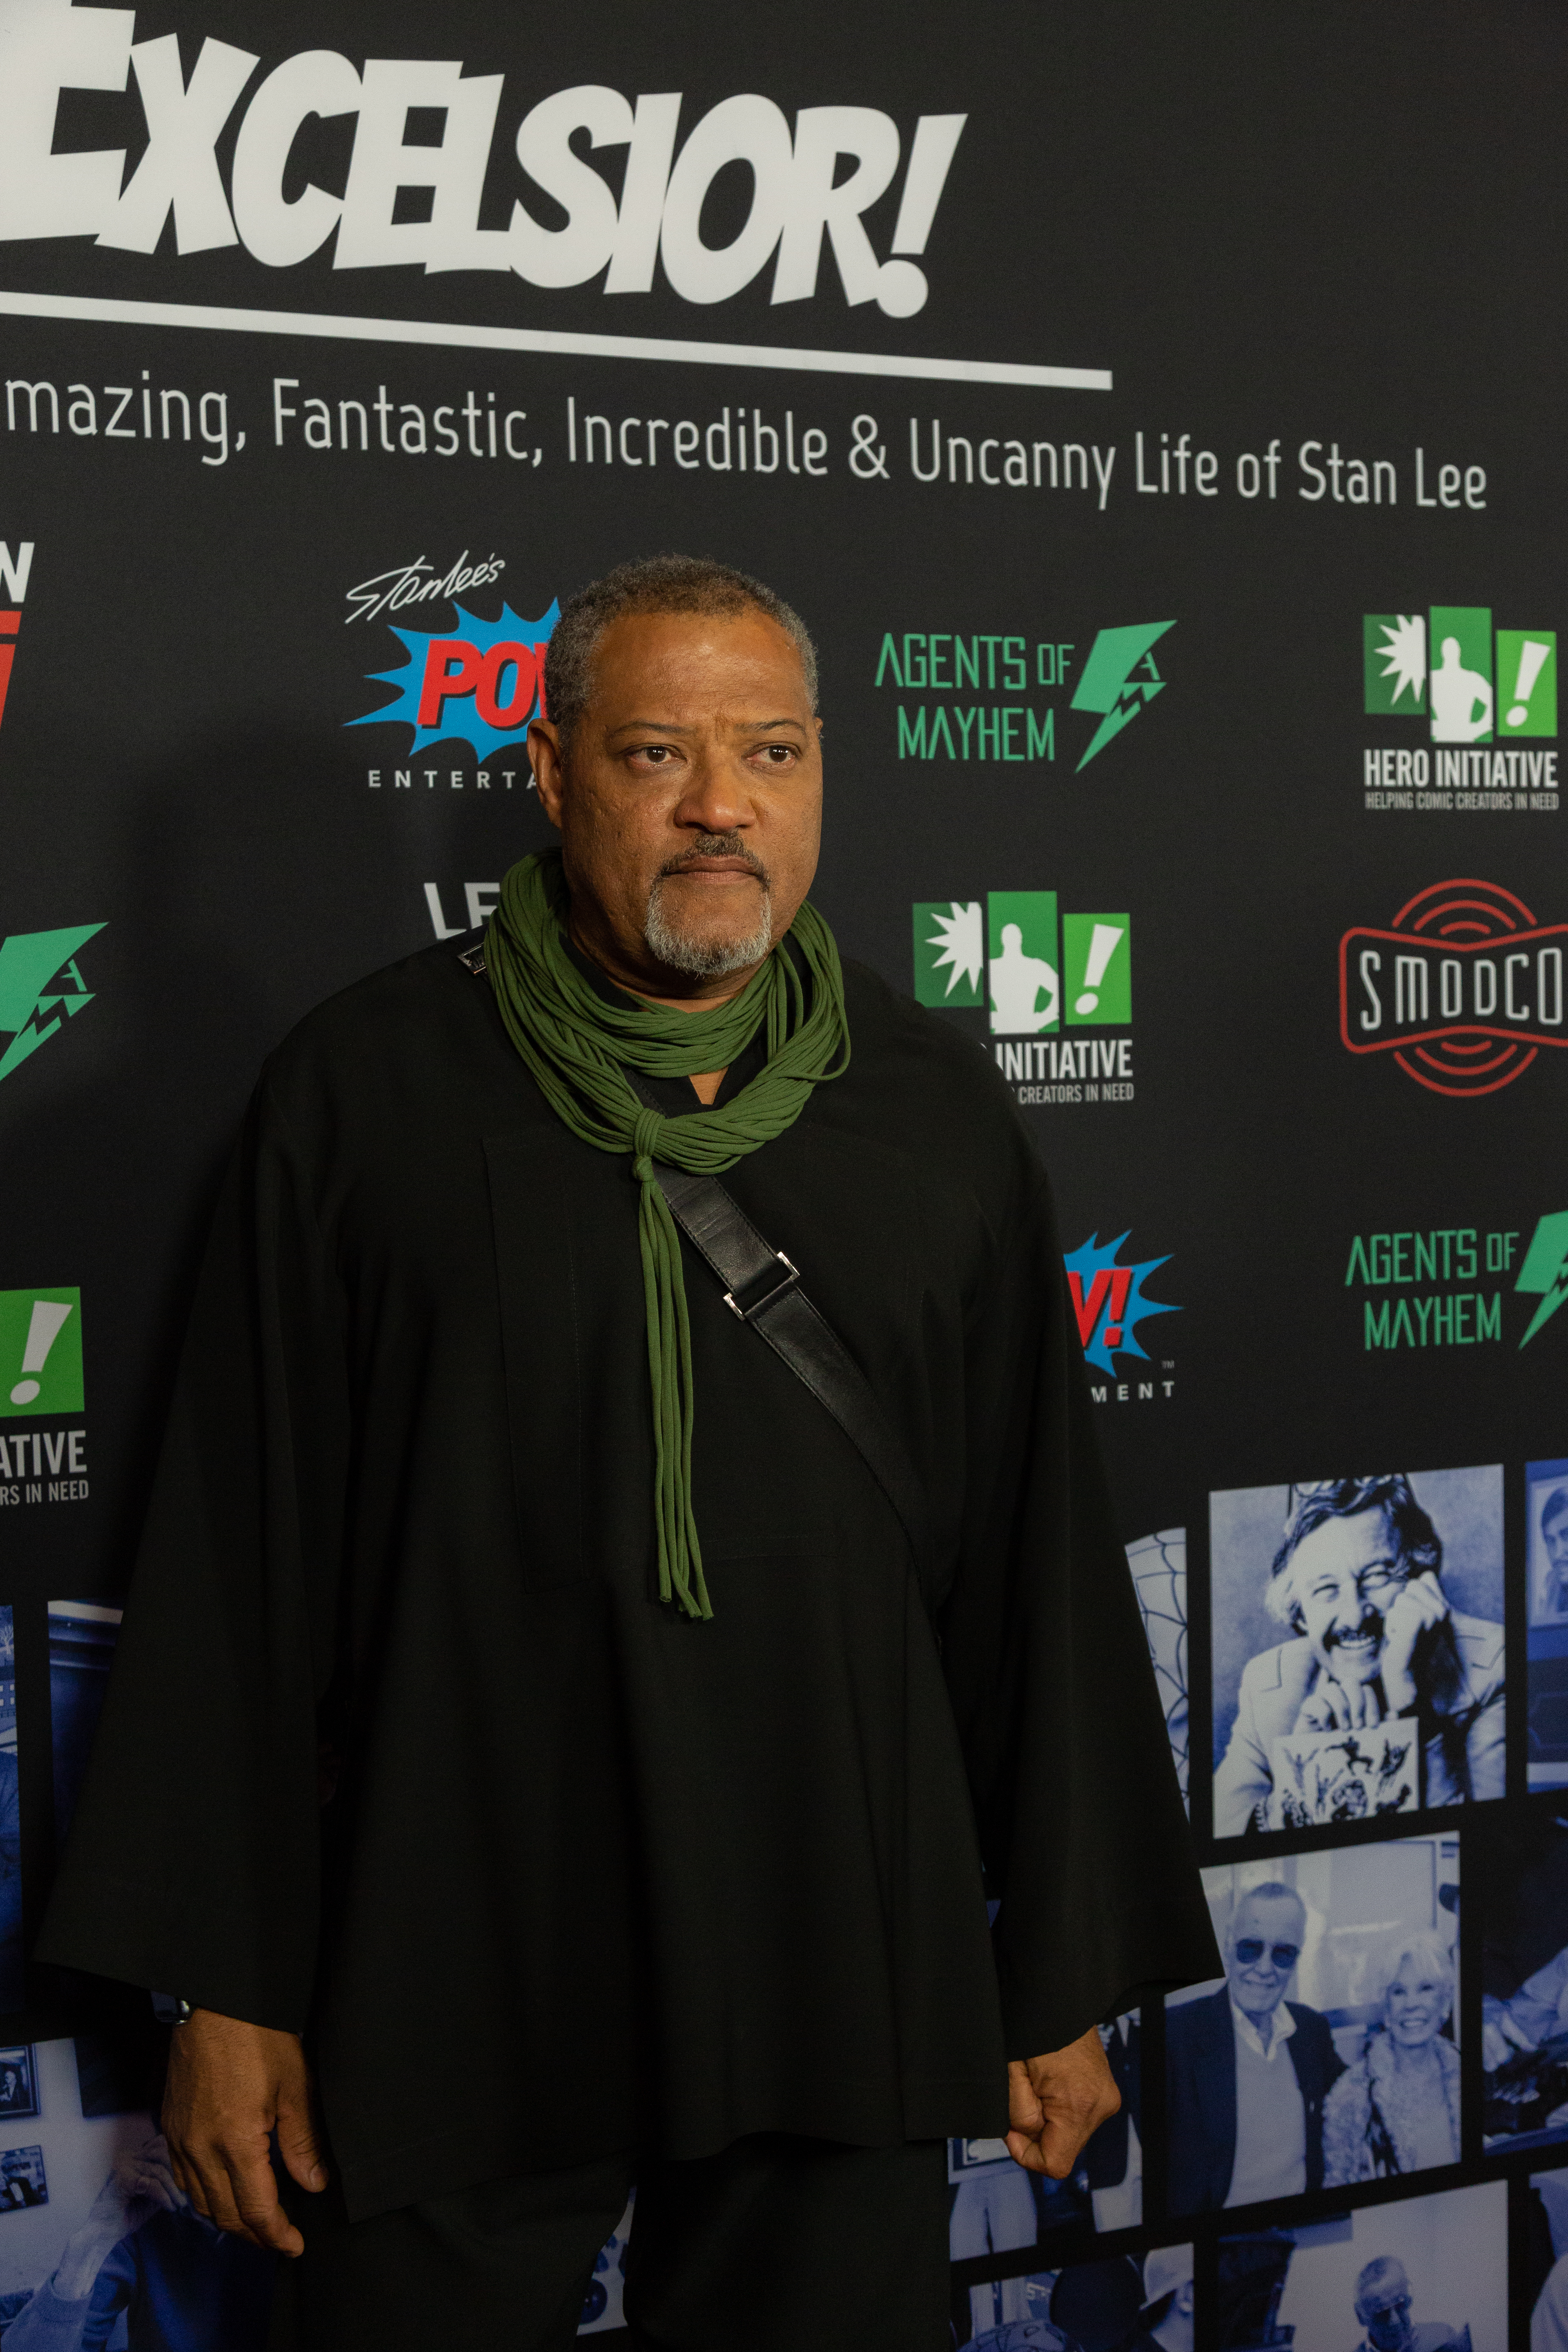 Laurence Fishburne attends “Excelsior! A Celebration of the Amazing, Fantastic, Incredible & Uncanny Life of Stan Lee (photo credit Bart Mastro)